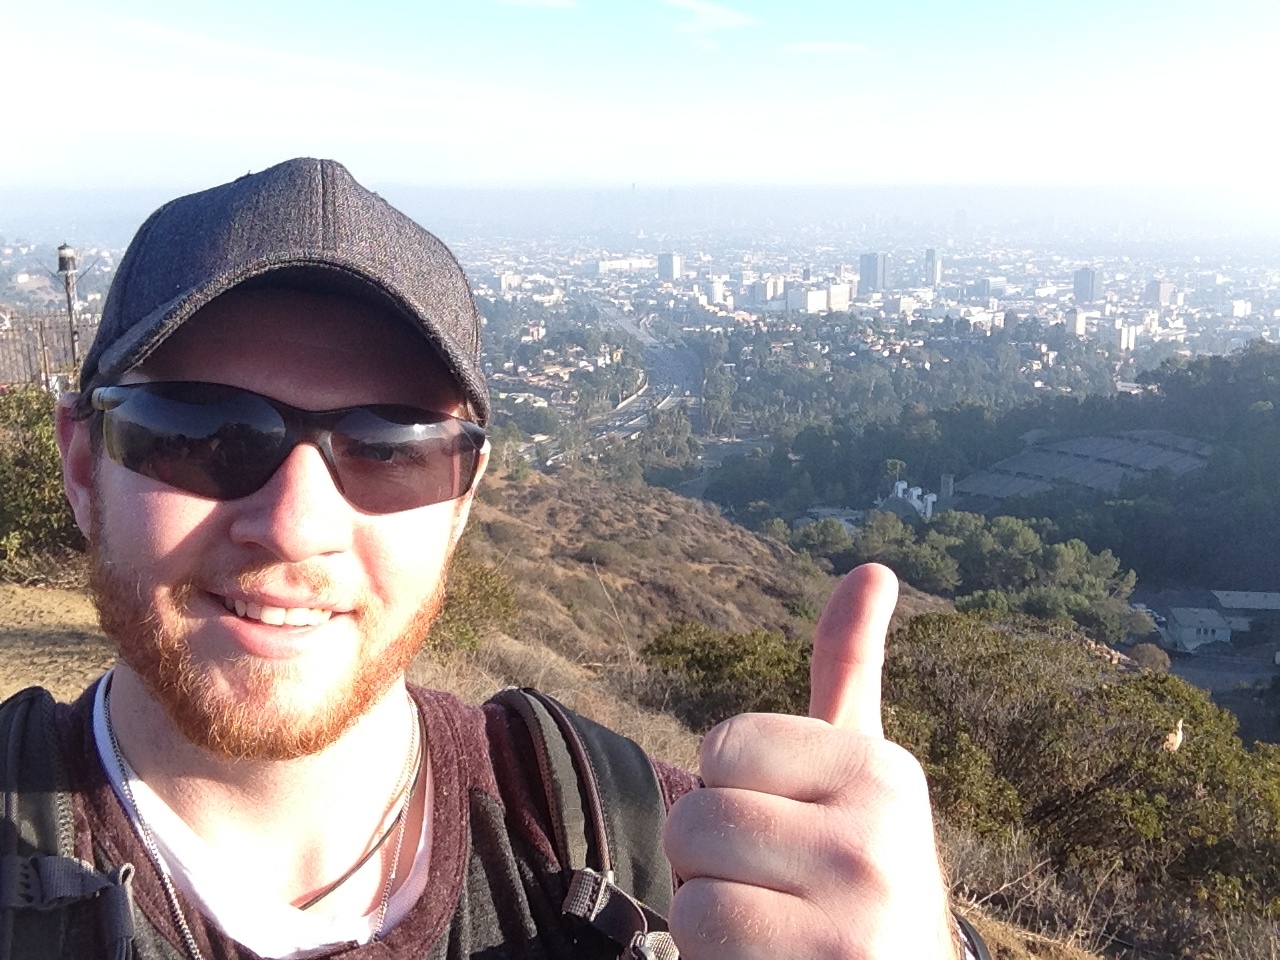 Zack over looking the city on top of the Hollywood sign